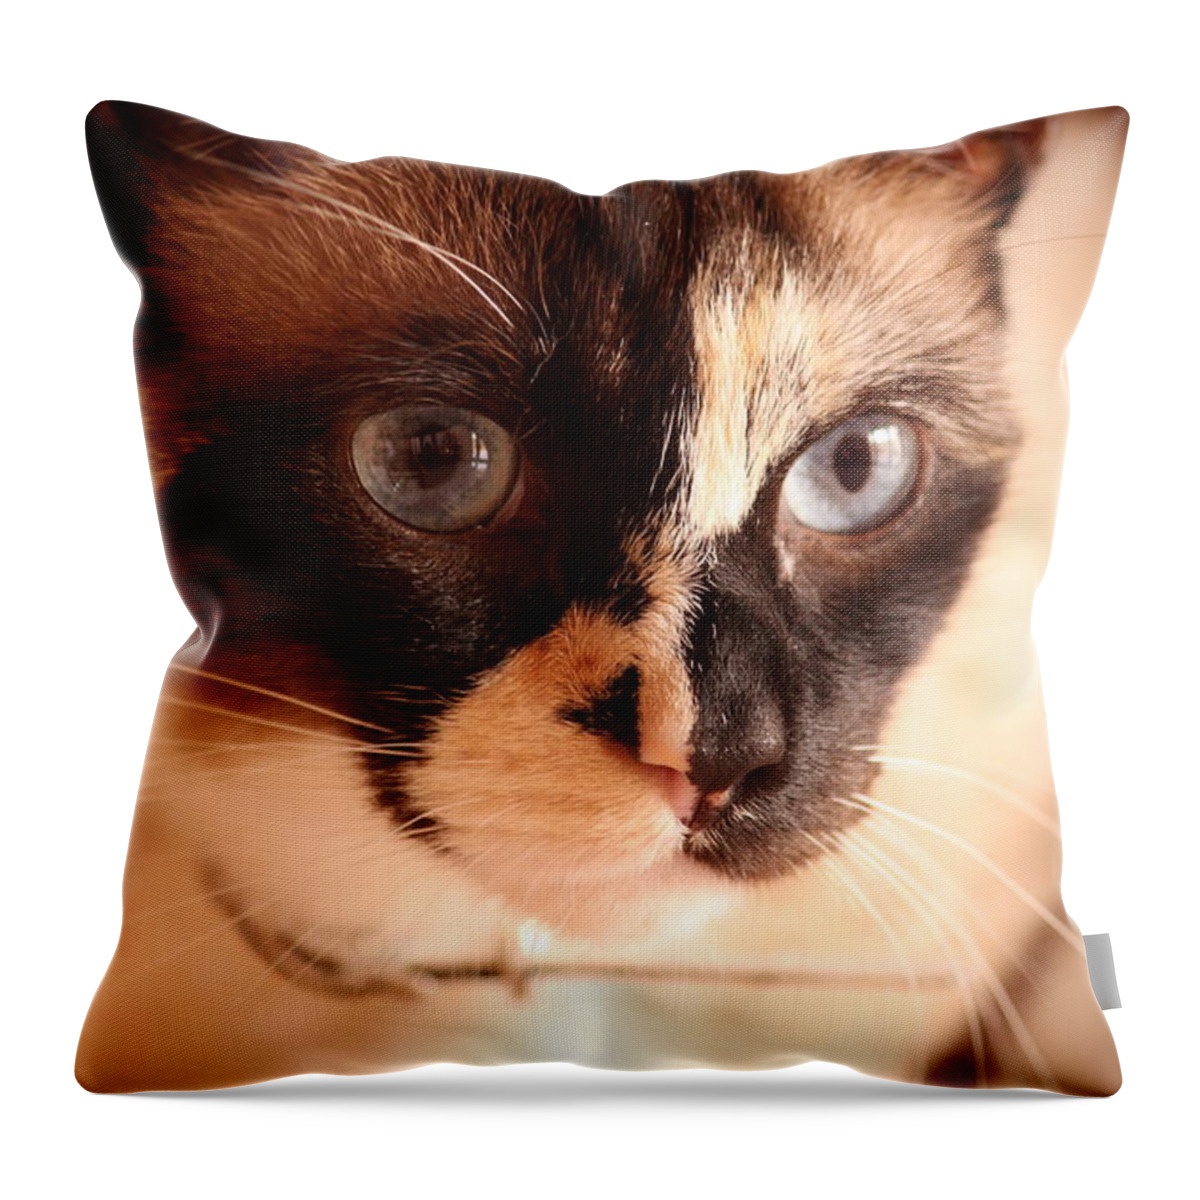 Minka Throw Pillow featuring the photograph Close Up Cat by Parushka Moodley